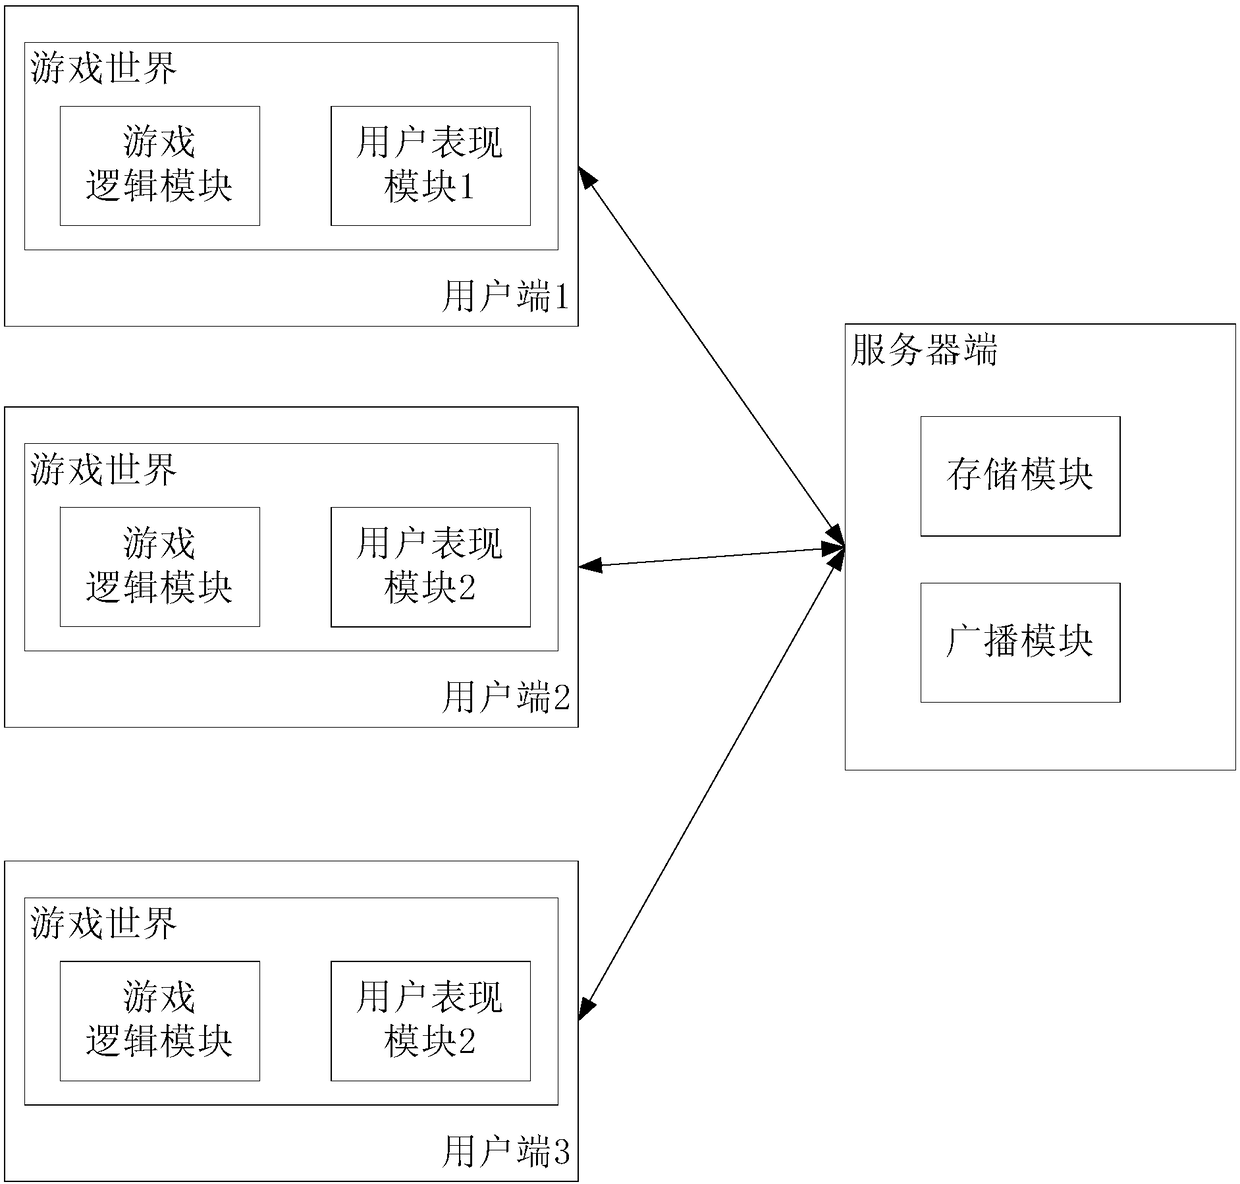 Peer-to-peer computing based game interactive method and system for multi-user scenario